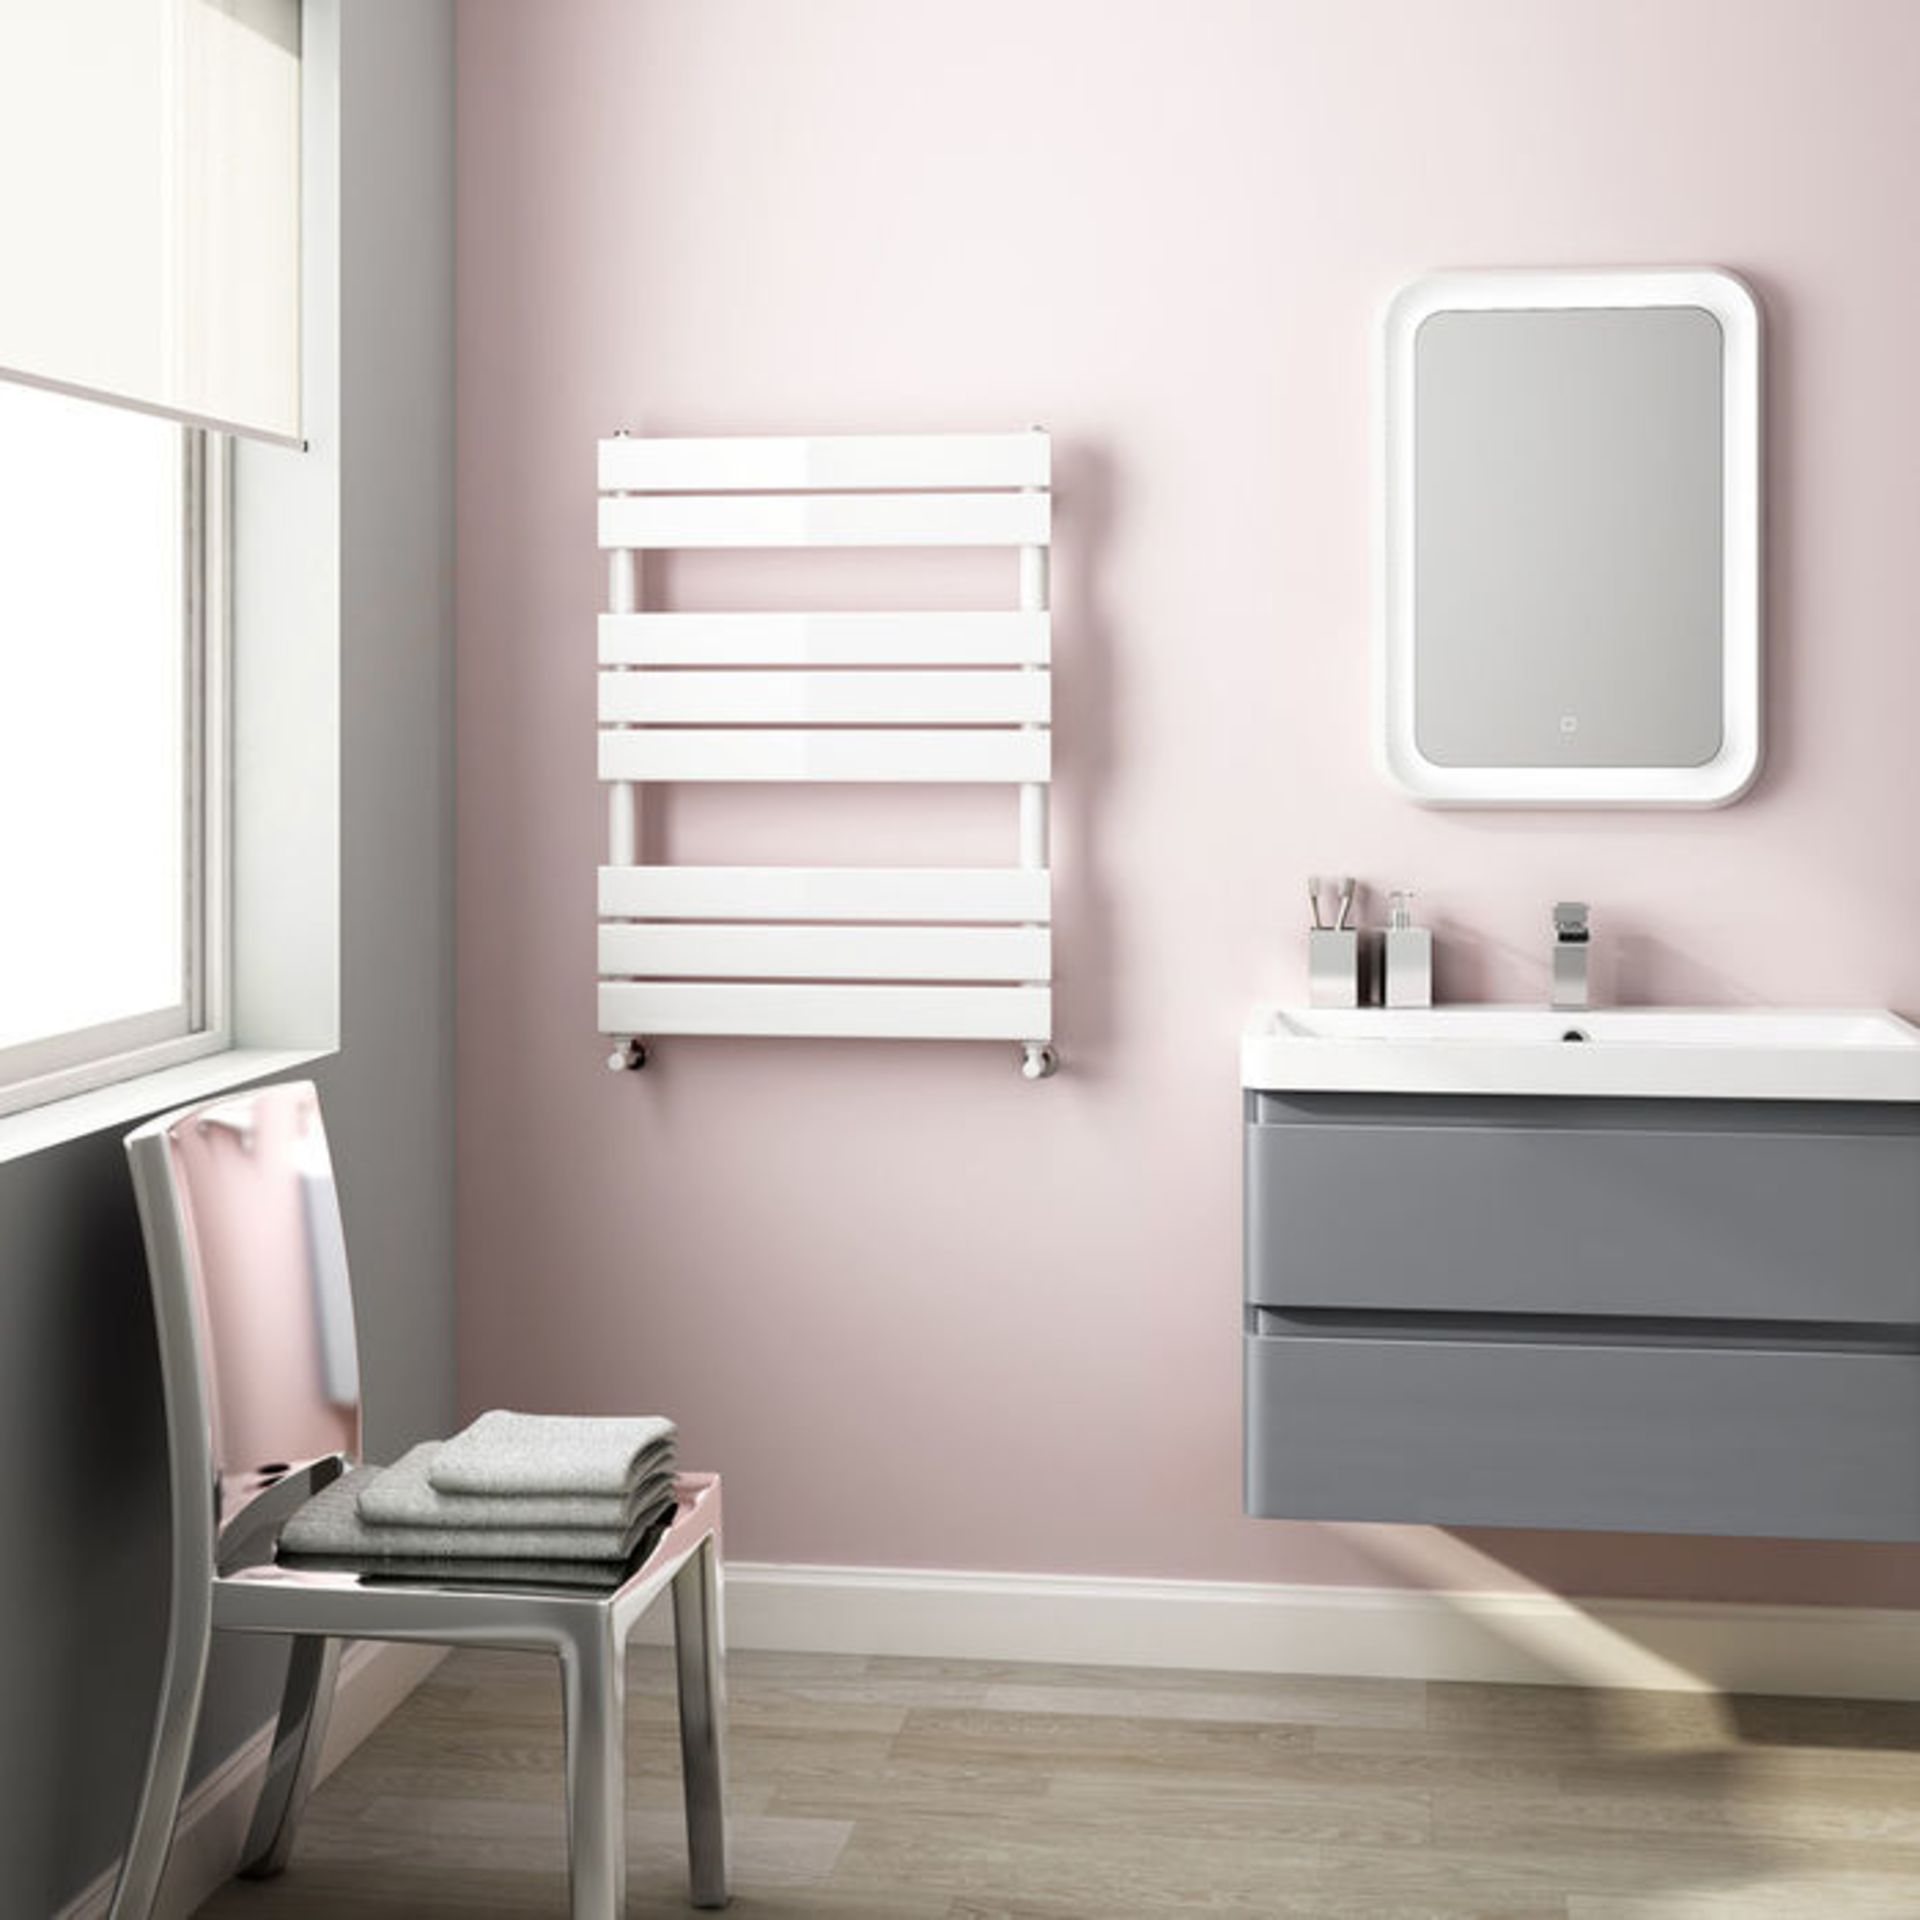 (H46) 800x600mm White Flat Panel Ladder Towel Radiator RRP £176.99 Low carbon steel, high quality - Image 2 of 2